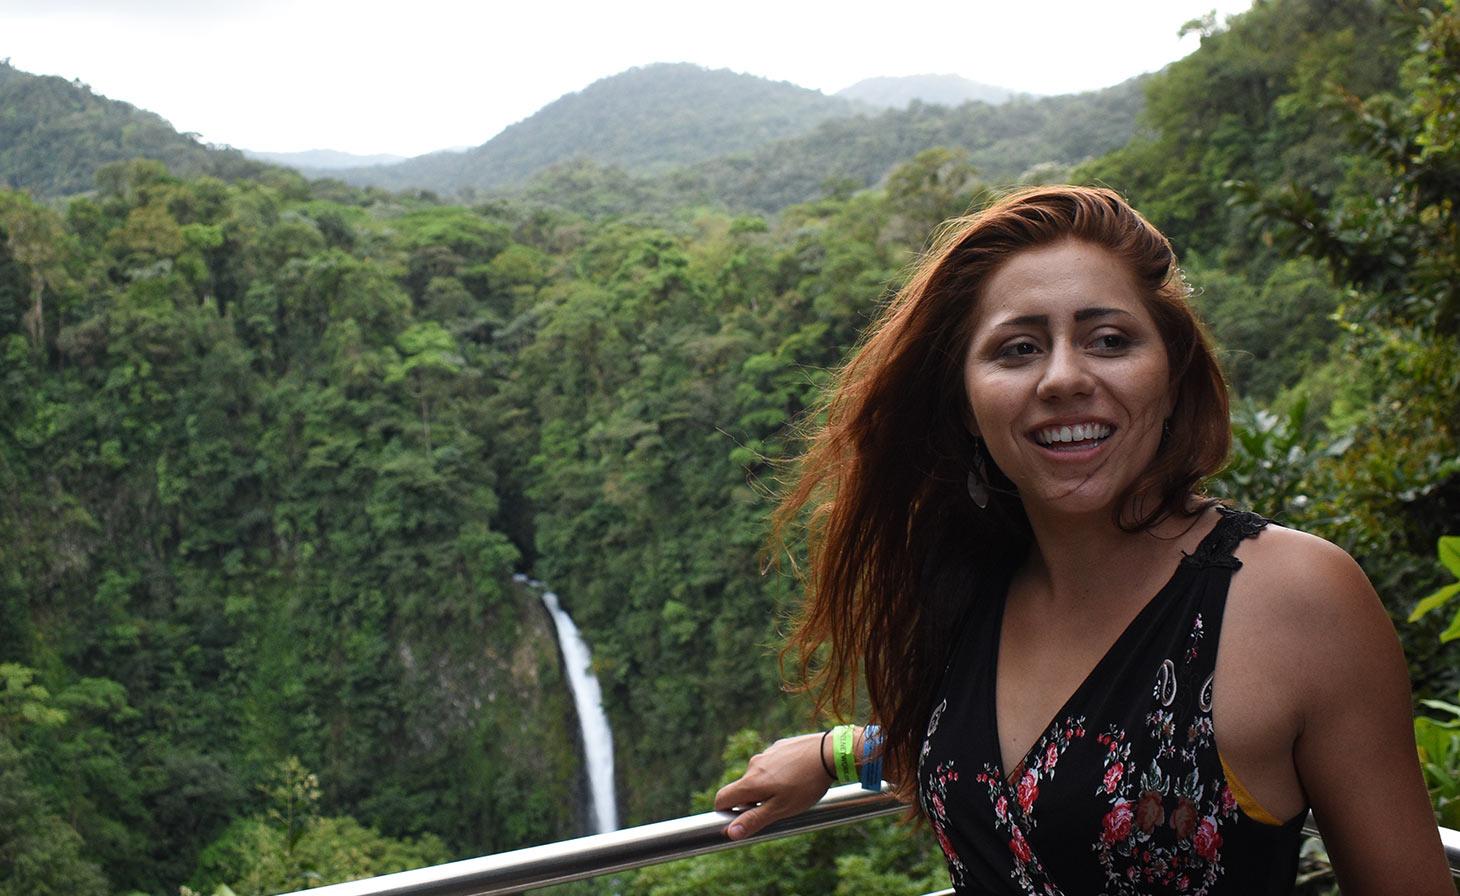 Tonya Allison in front of waterfall in tropical forest